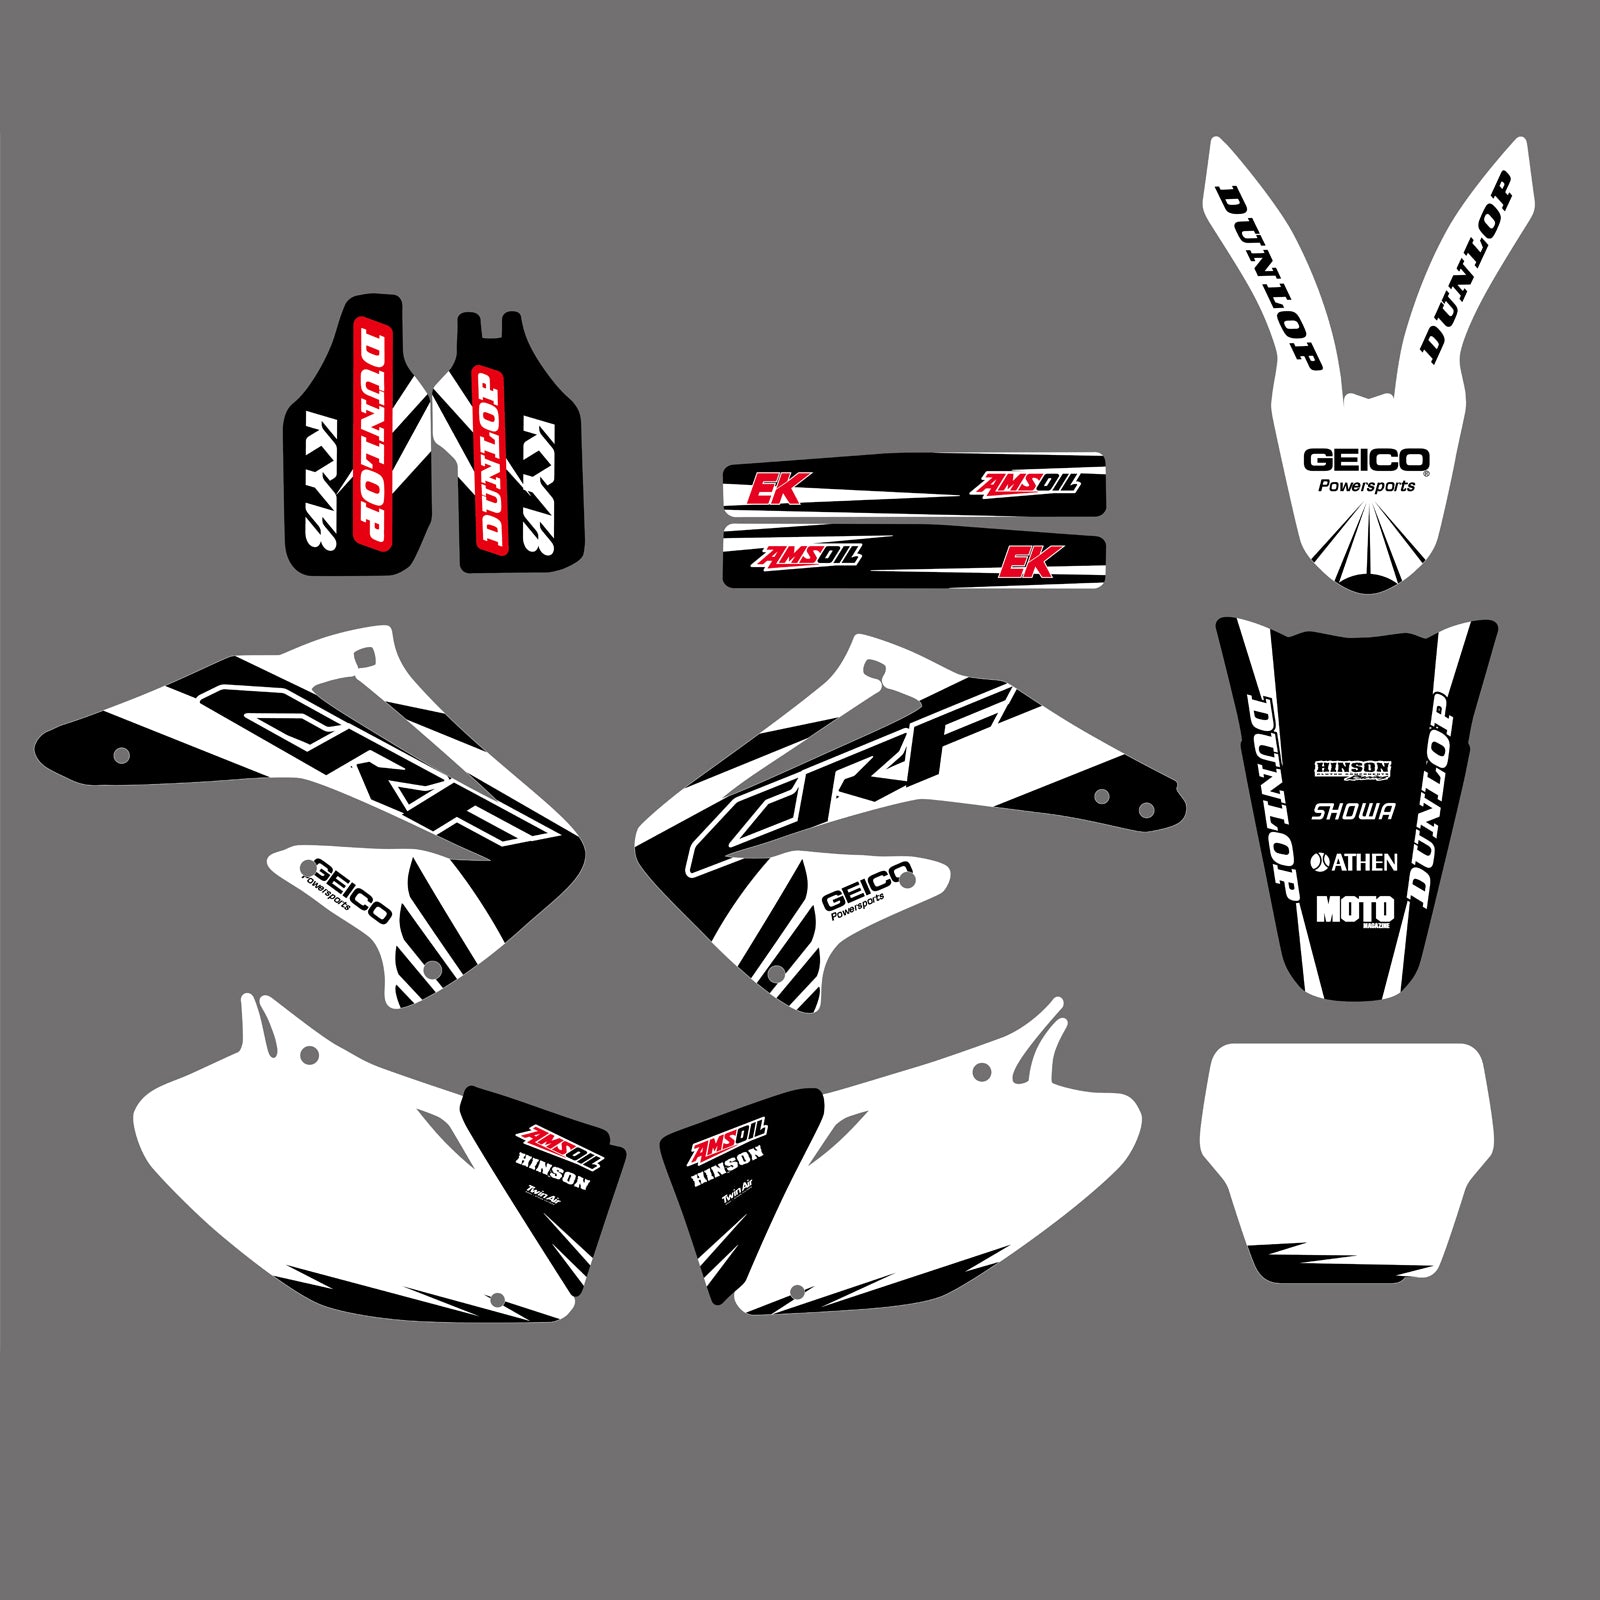 Motorcycle Graphics Backgrounds Decal Sticker For Honda CRF450R 02-04